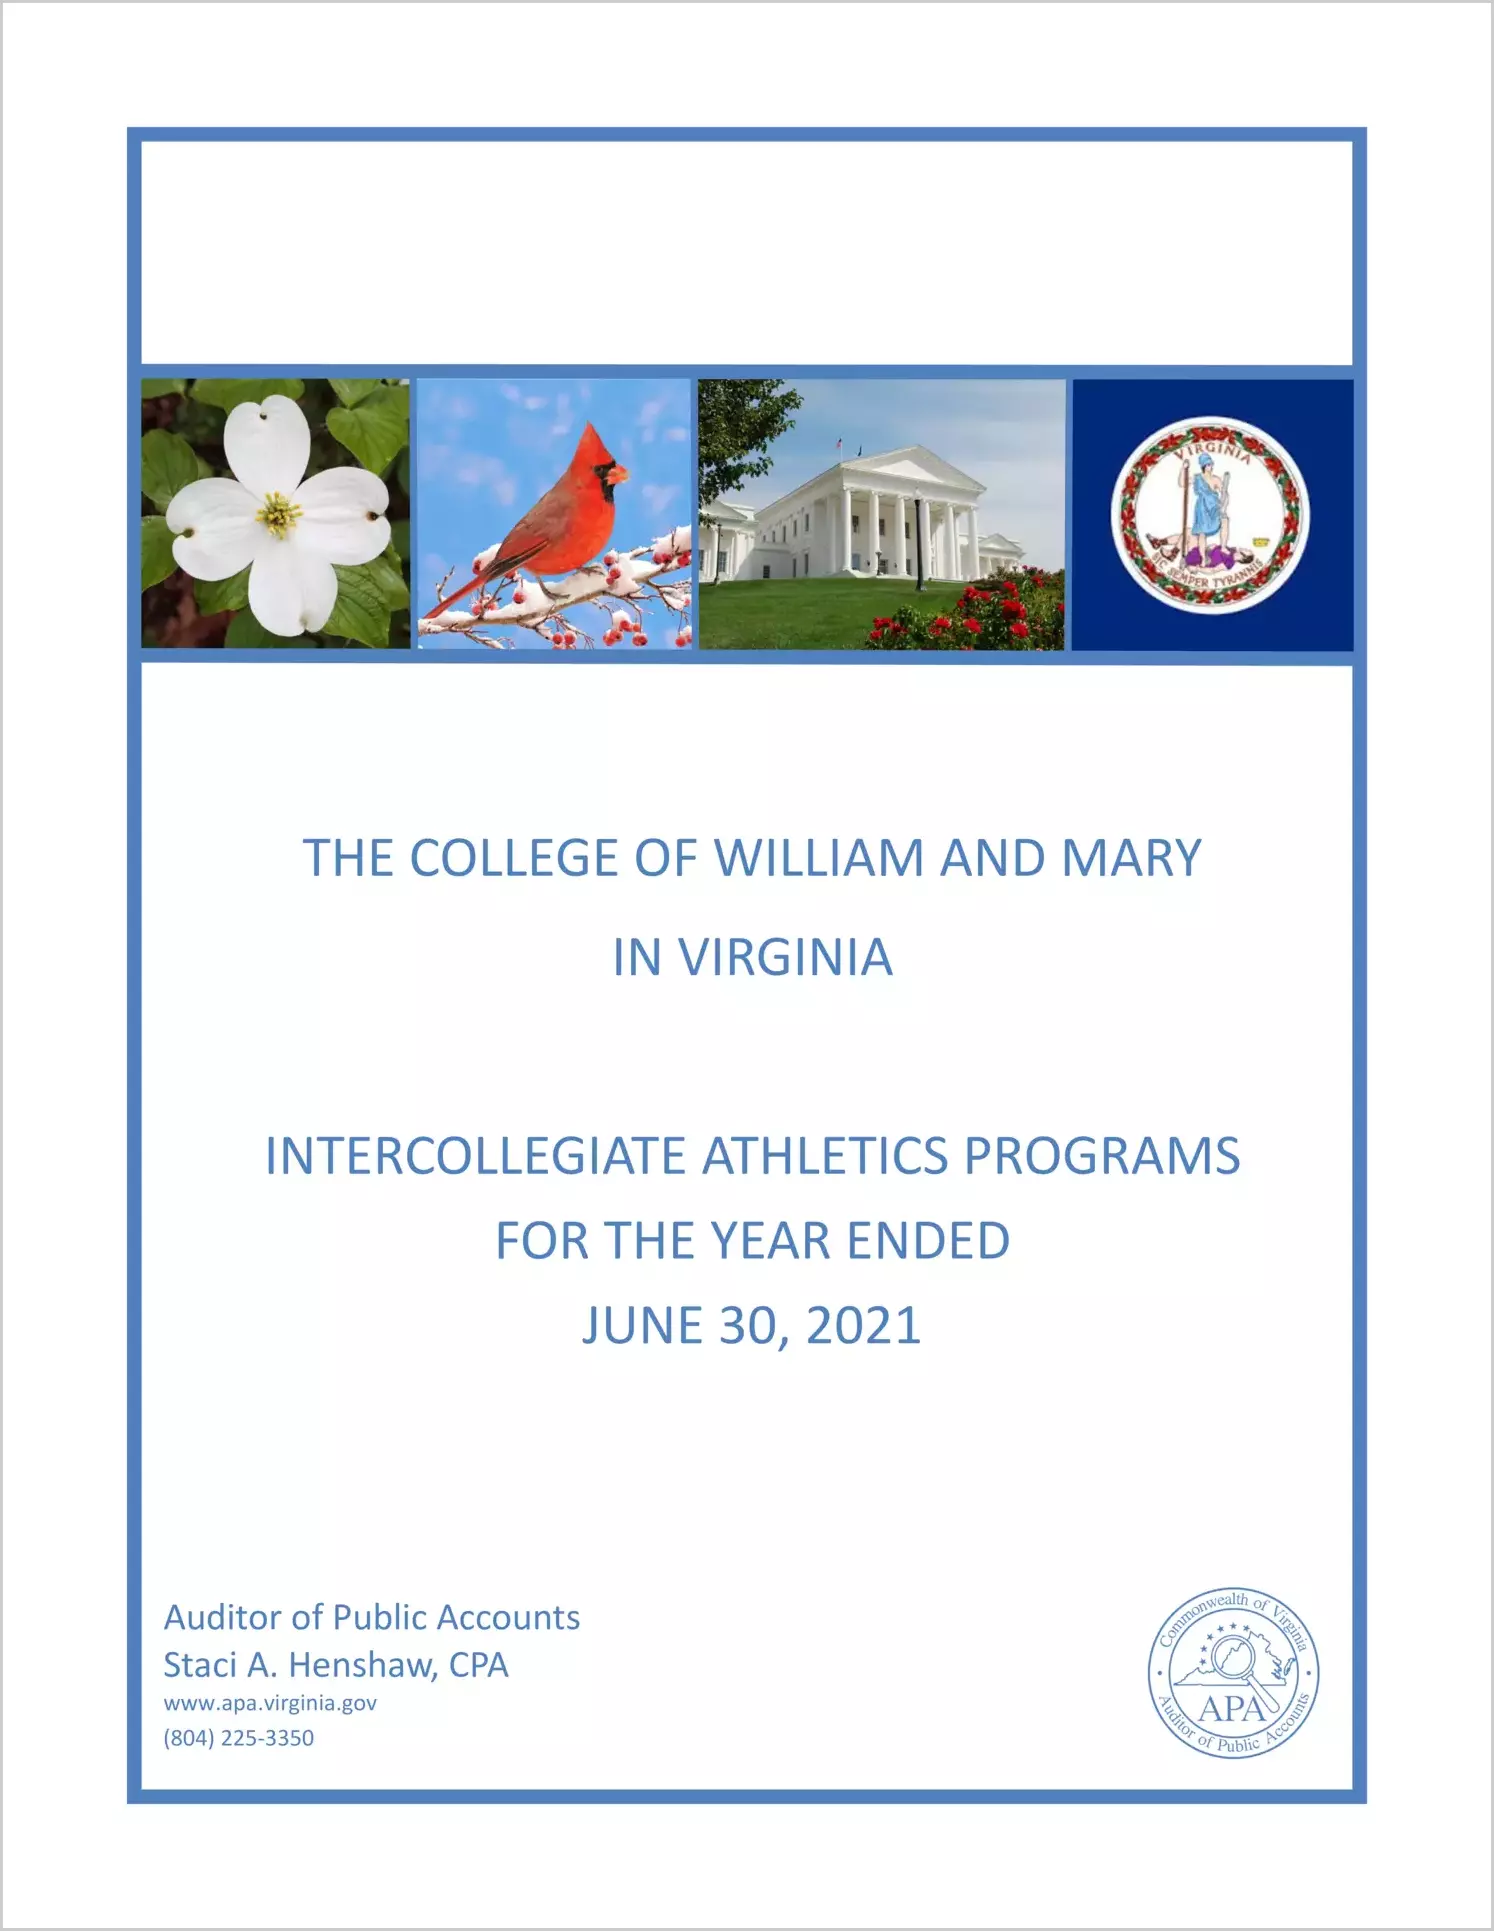 The College of William and Mary in Virginia Intercollegiate Athletics Programs for the year ended June 30, 2021